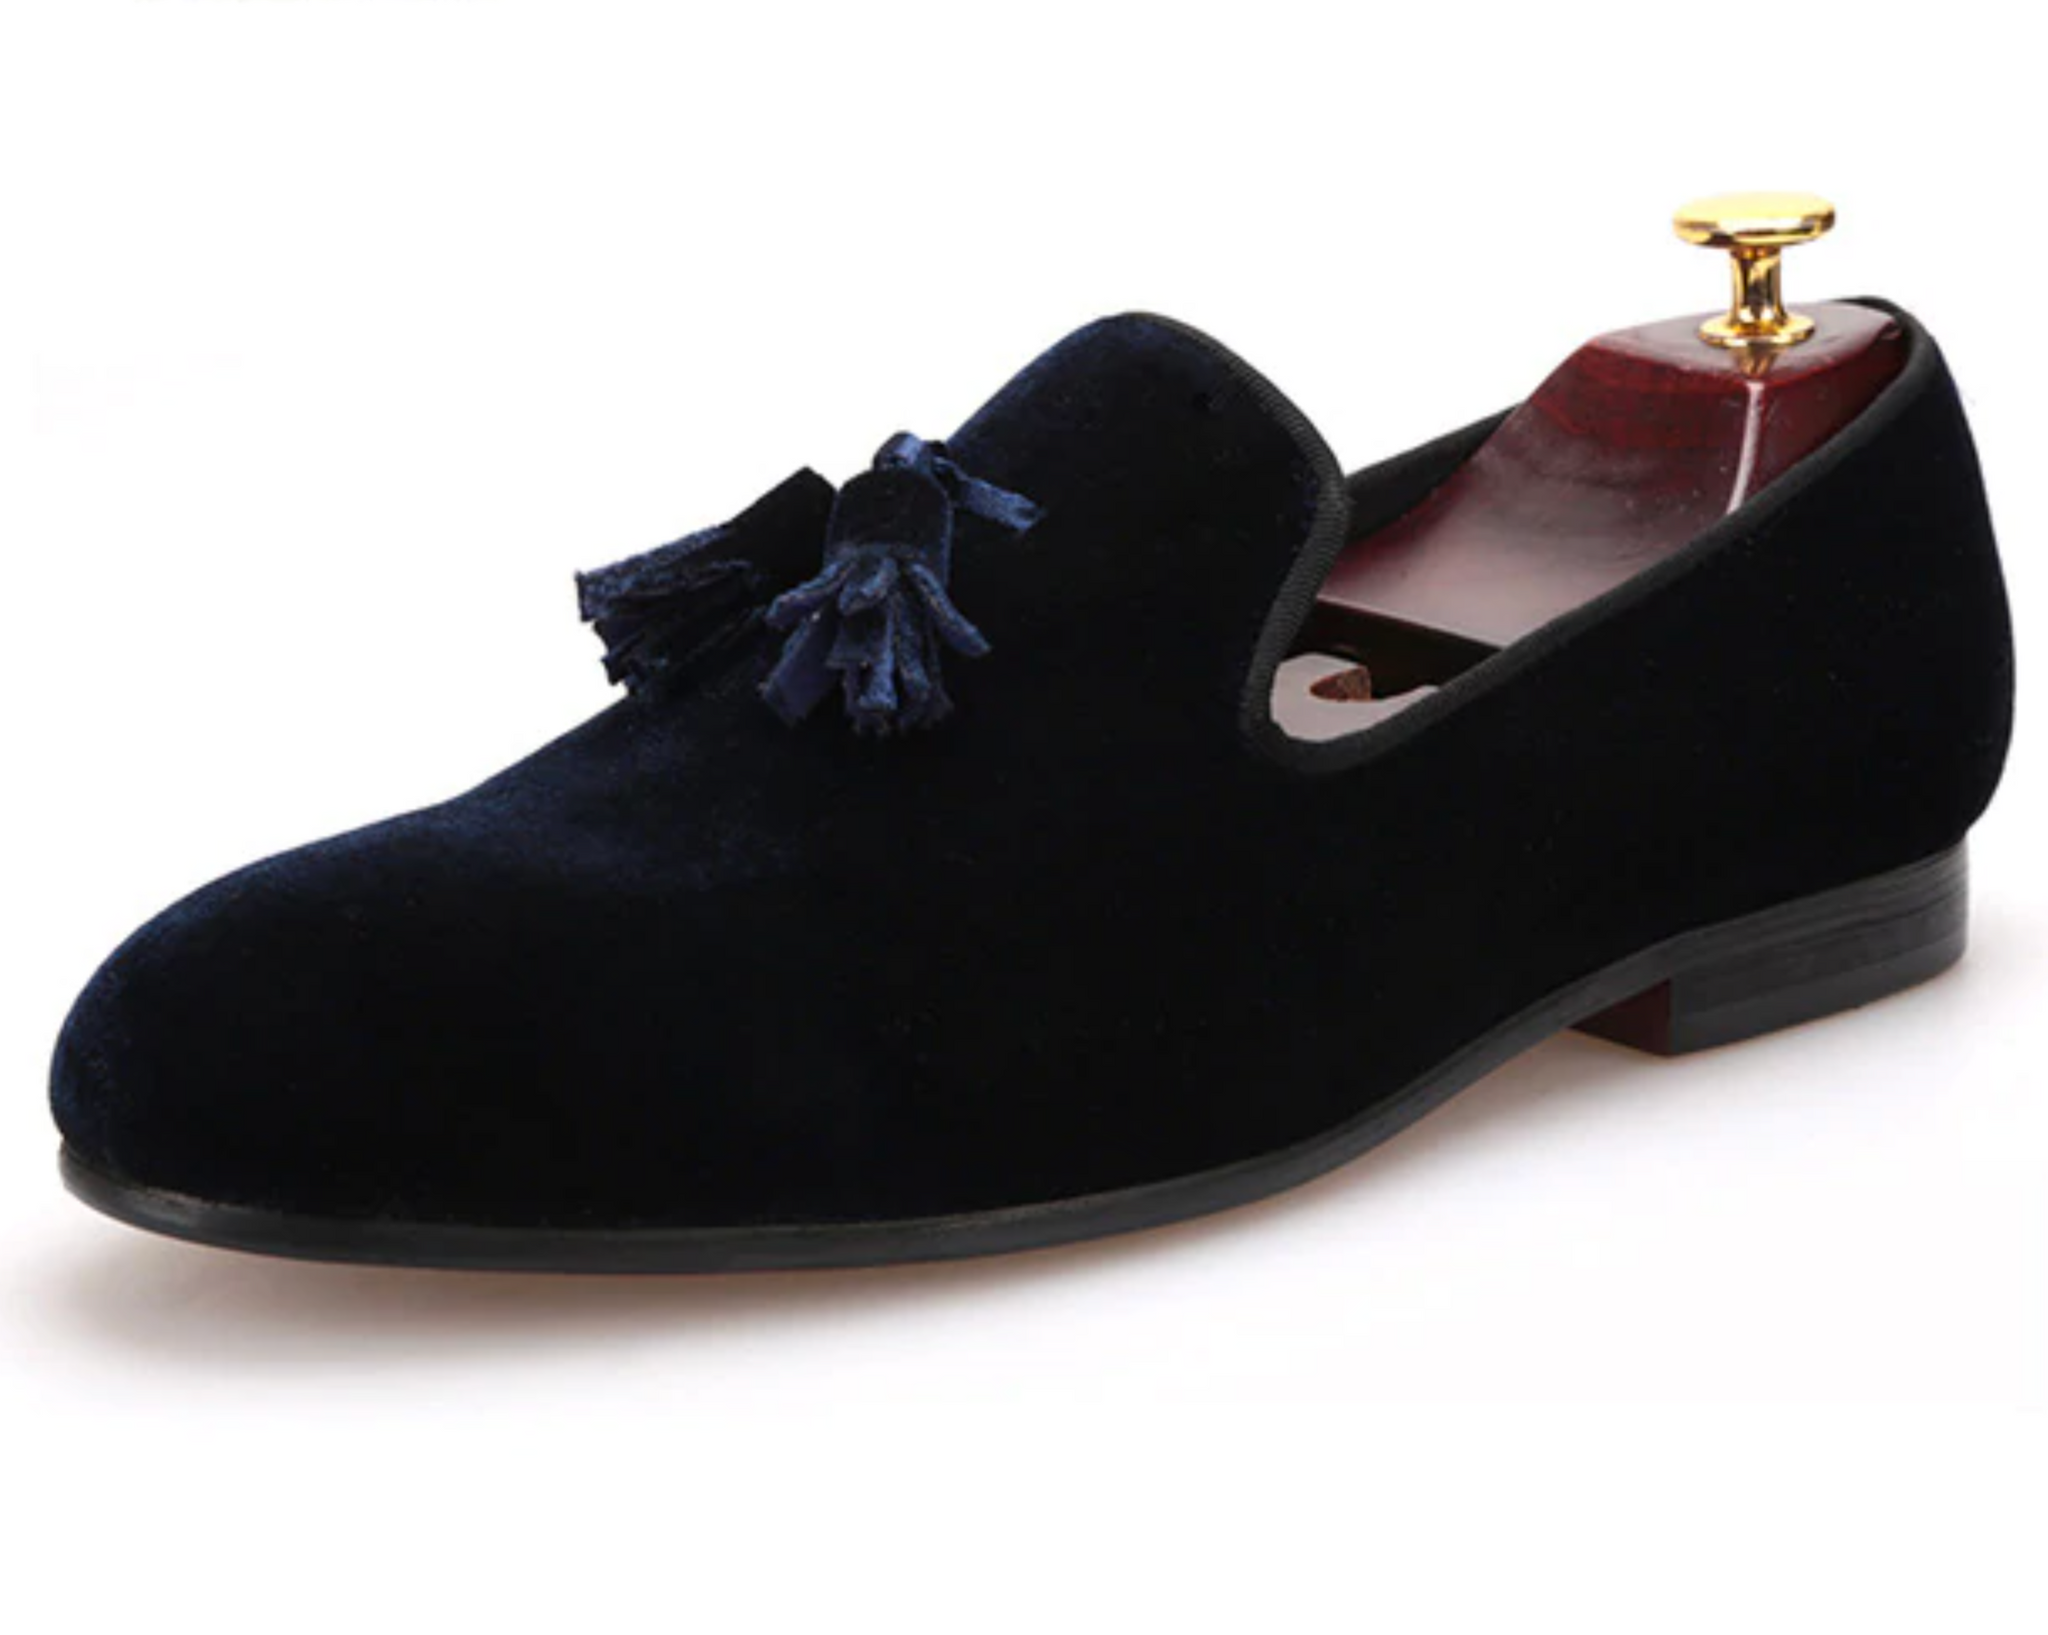 Navy-blue velvet-look tasselled loafers with a plush red quilted lining.